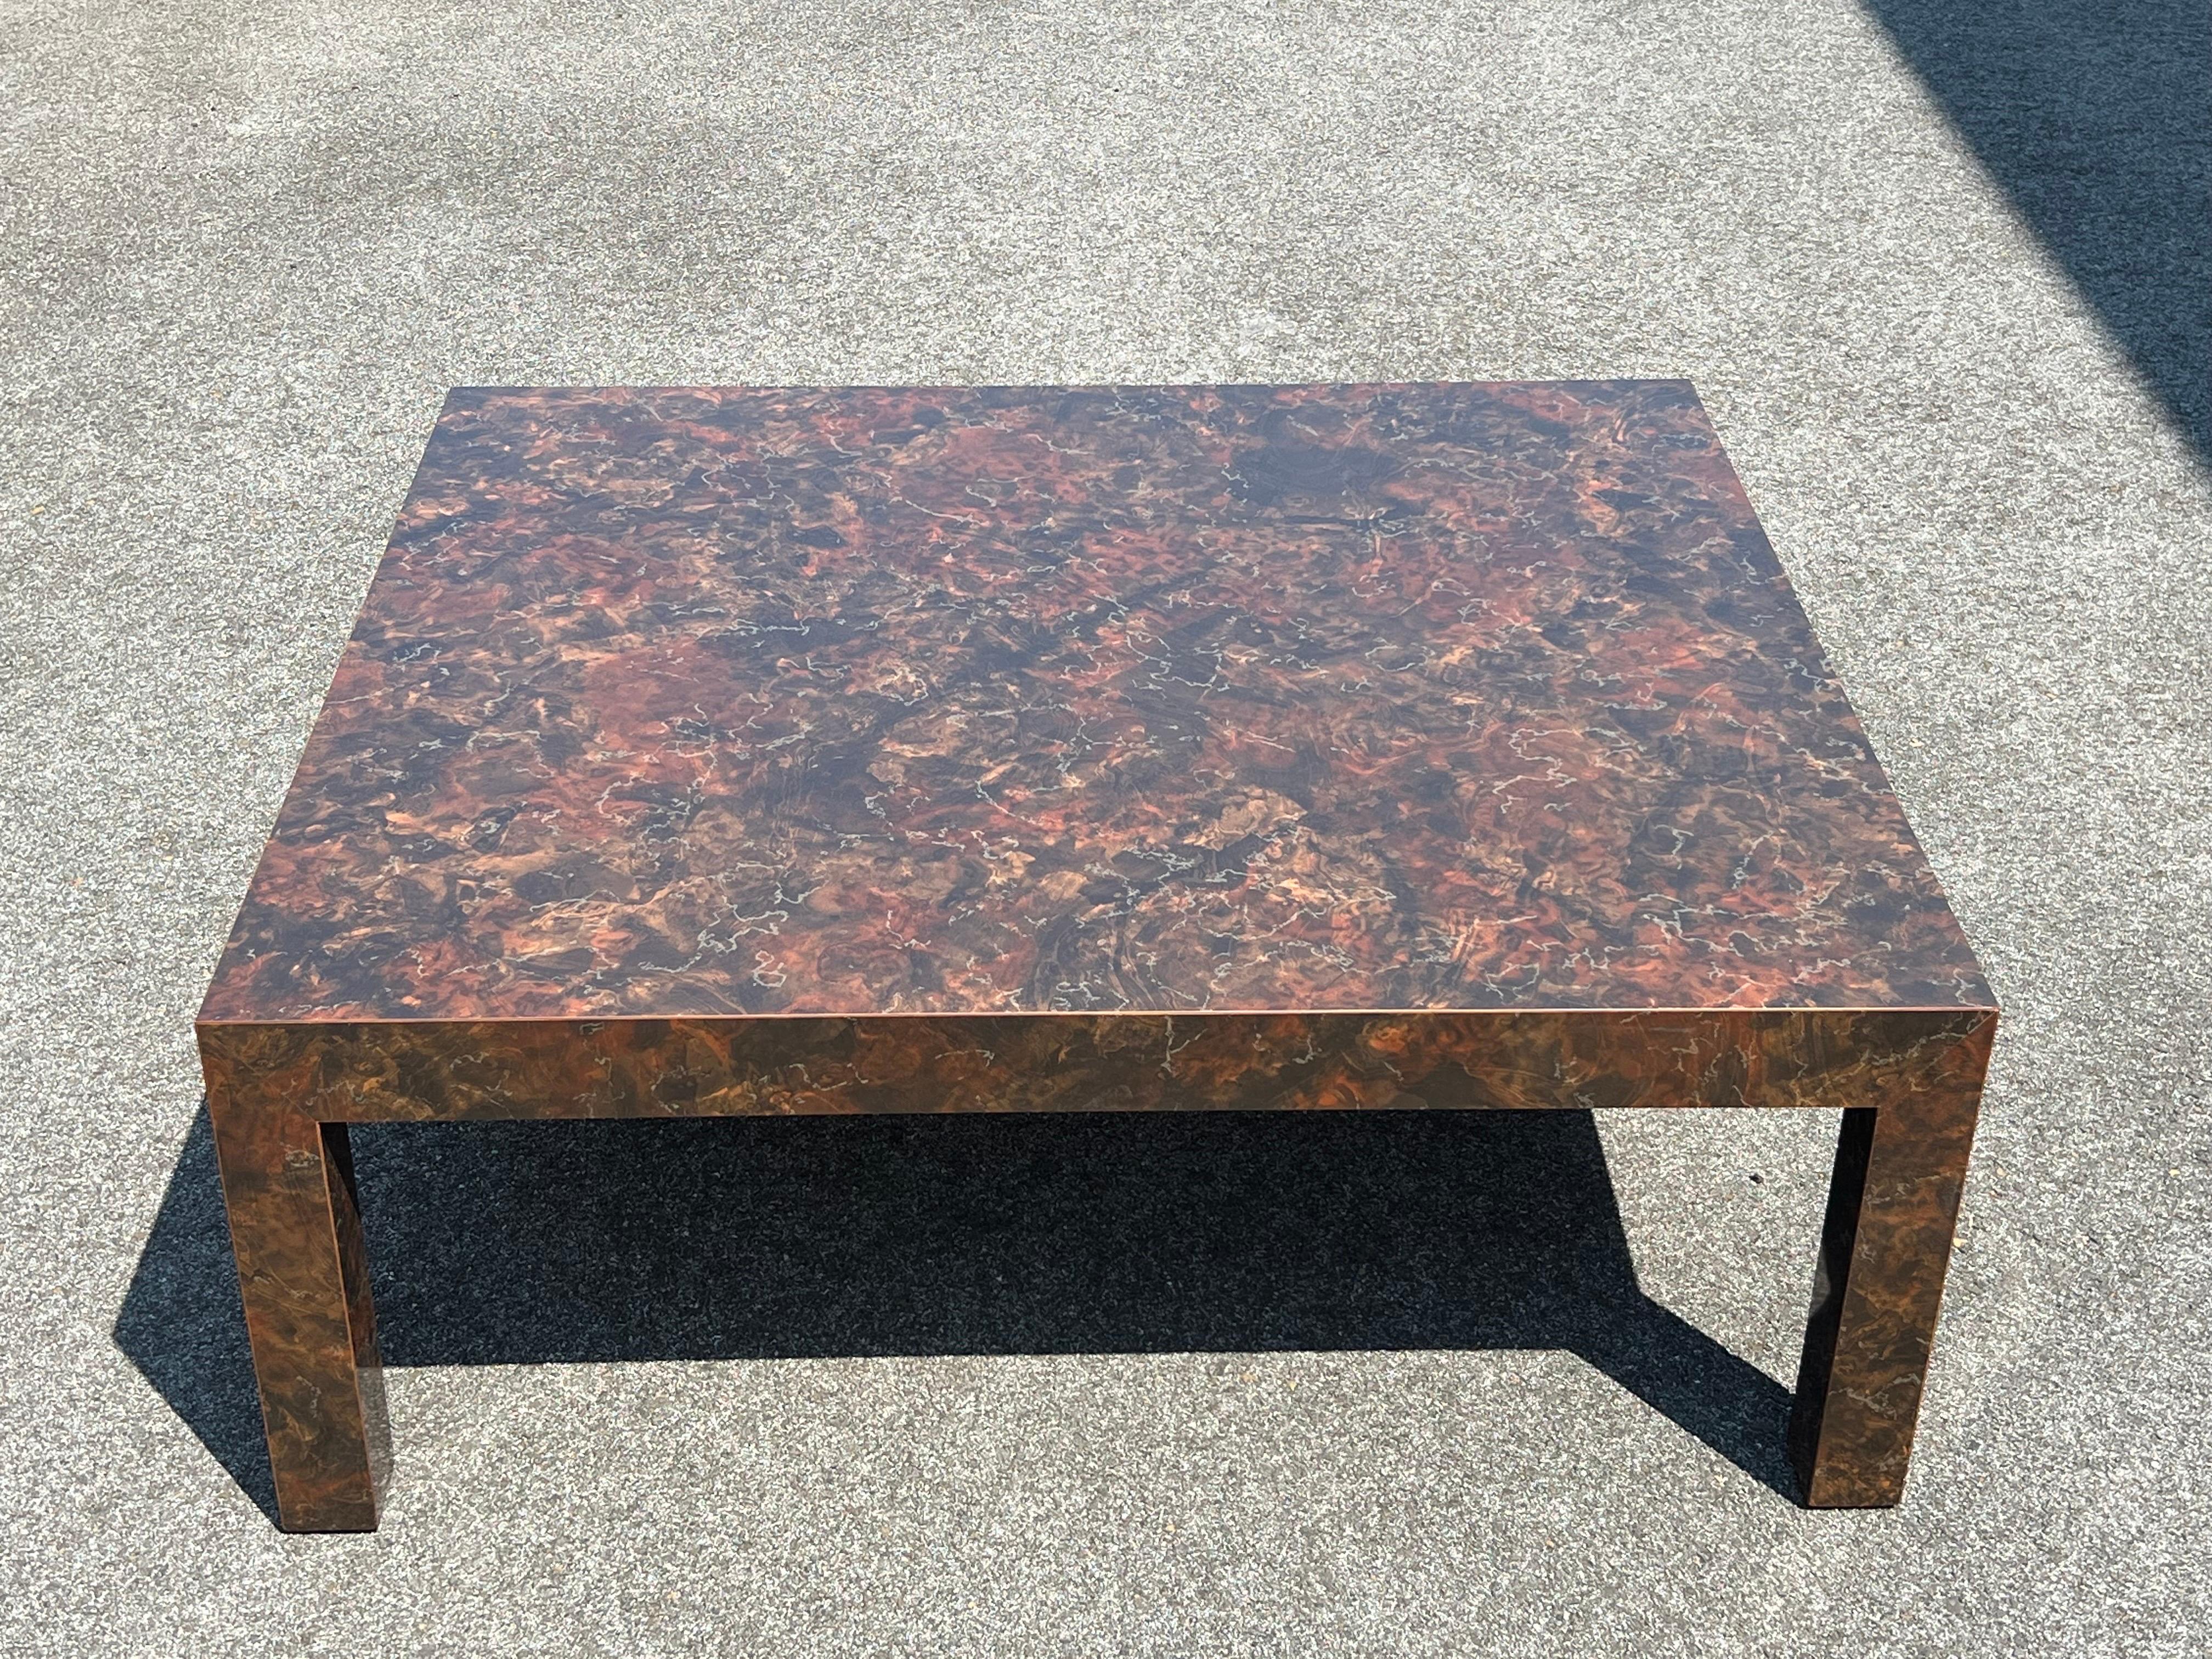 Post Modern Laminated Tortoiseshell Coffee Table  In Good Condition For Sale In Redding, CT